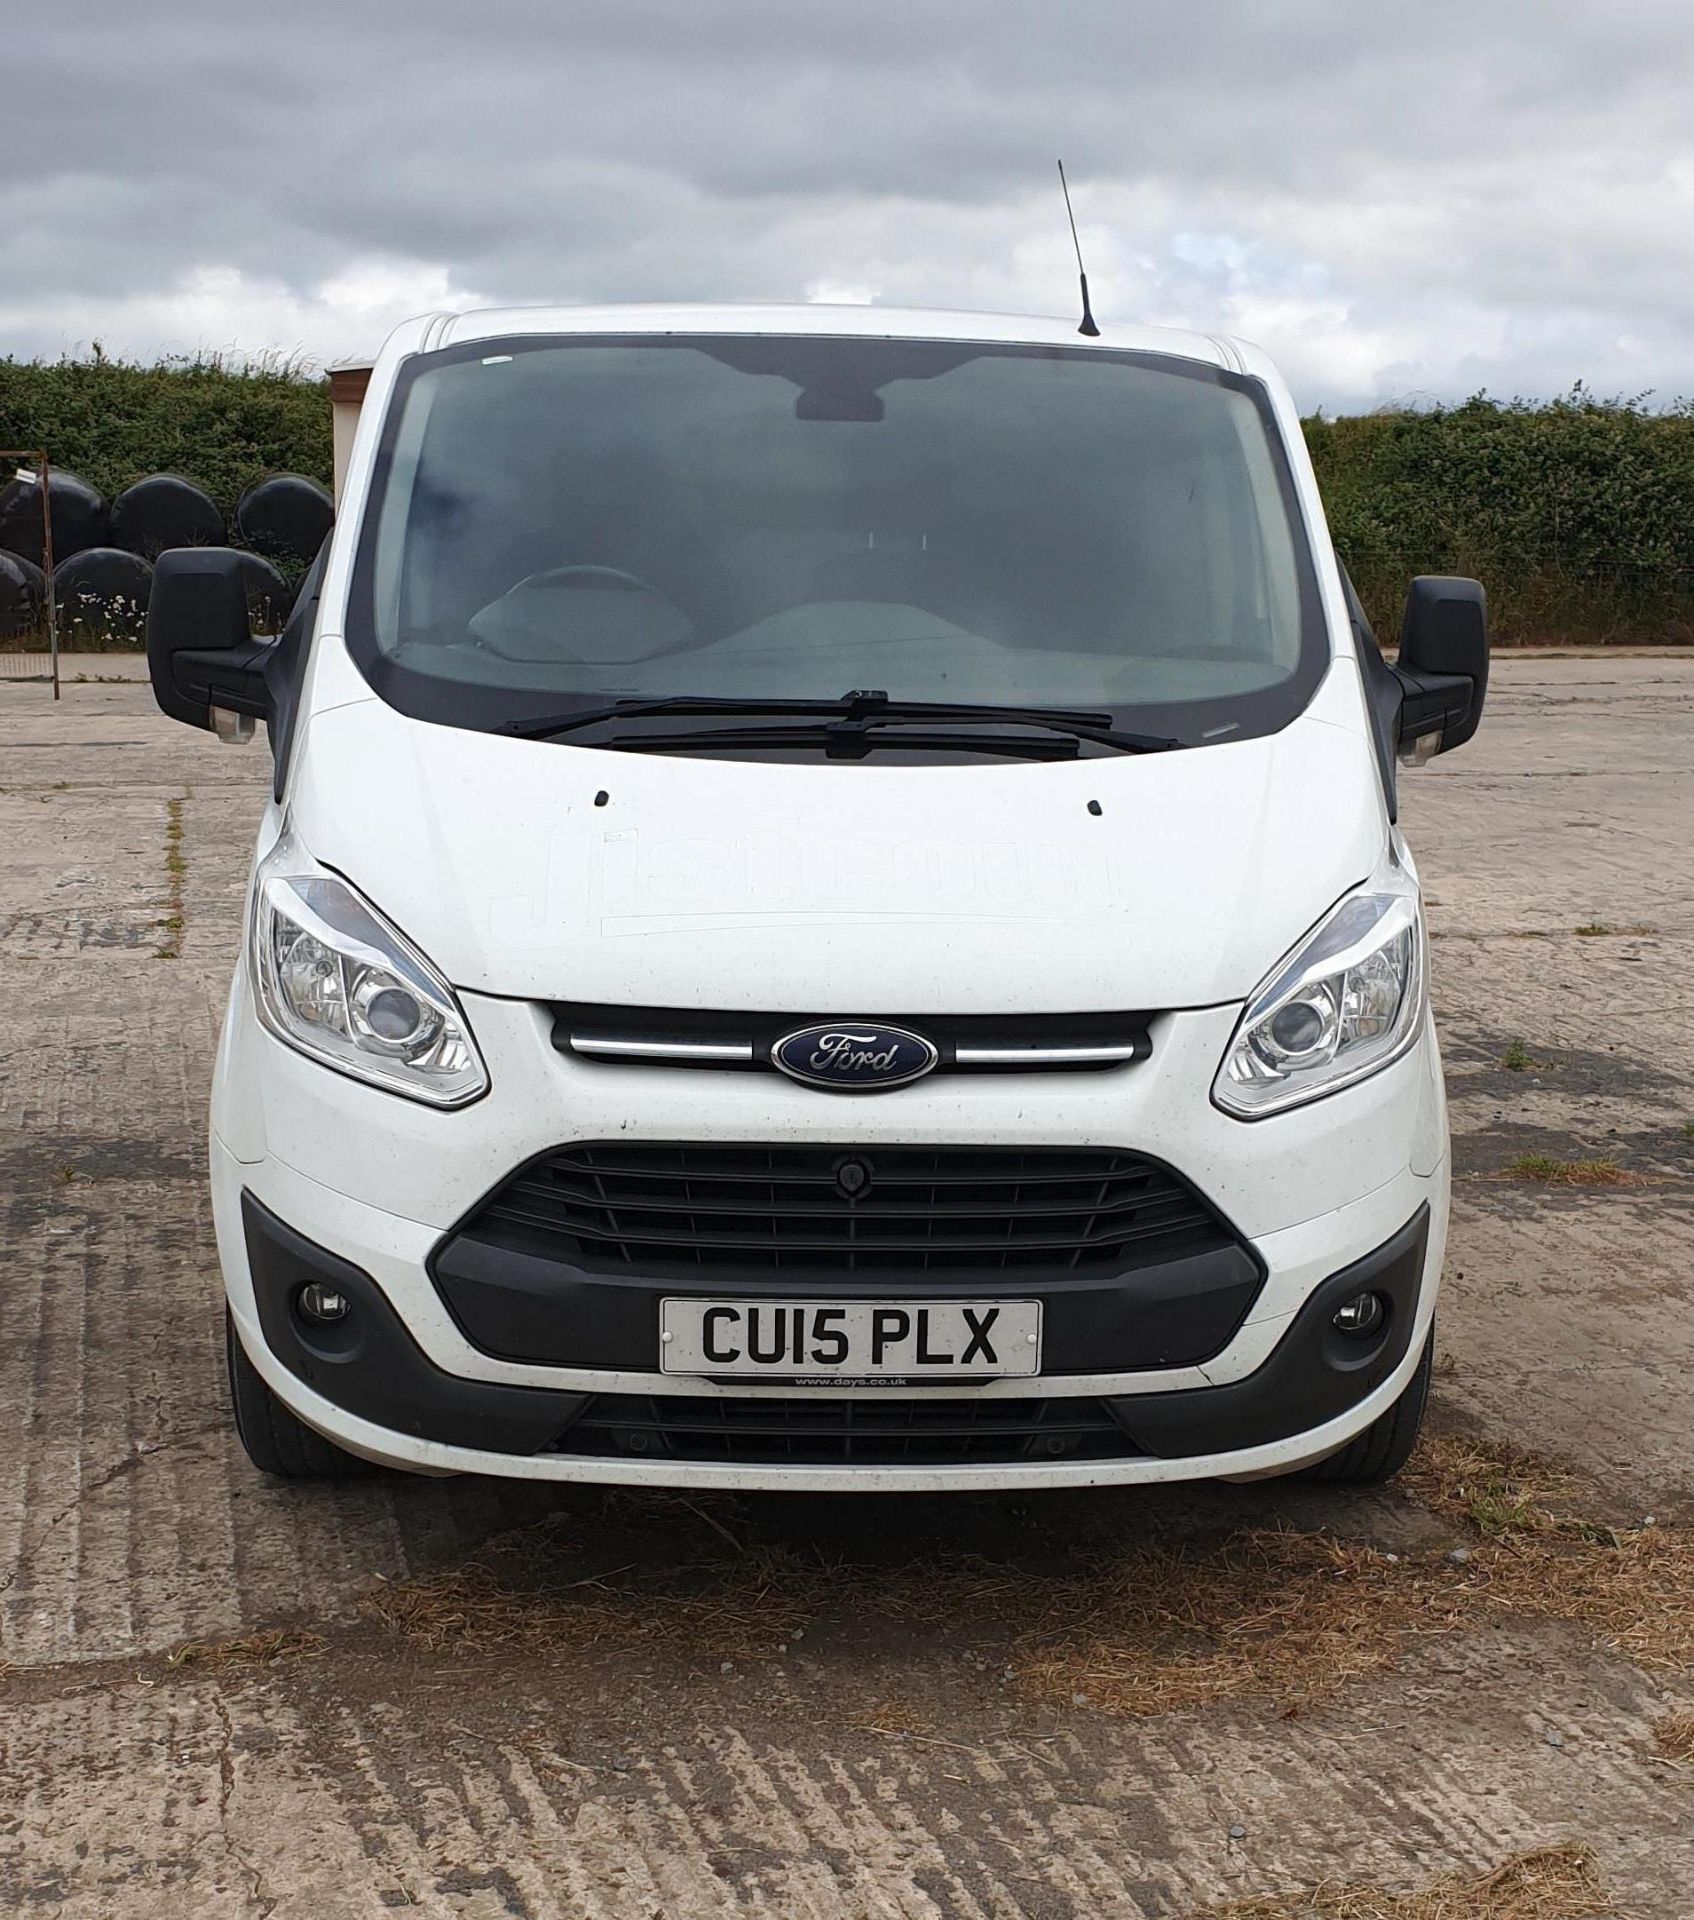 Ford Transit Custom 290 2.2 TDCi 100ps Low Roof Tr - Image 3 of 8